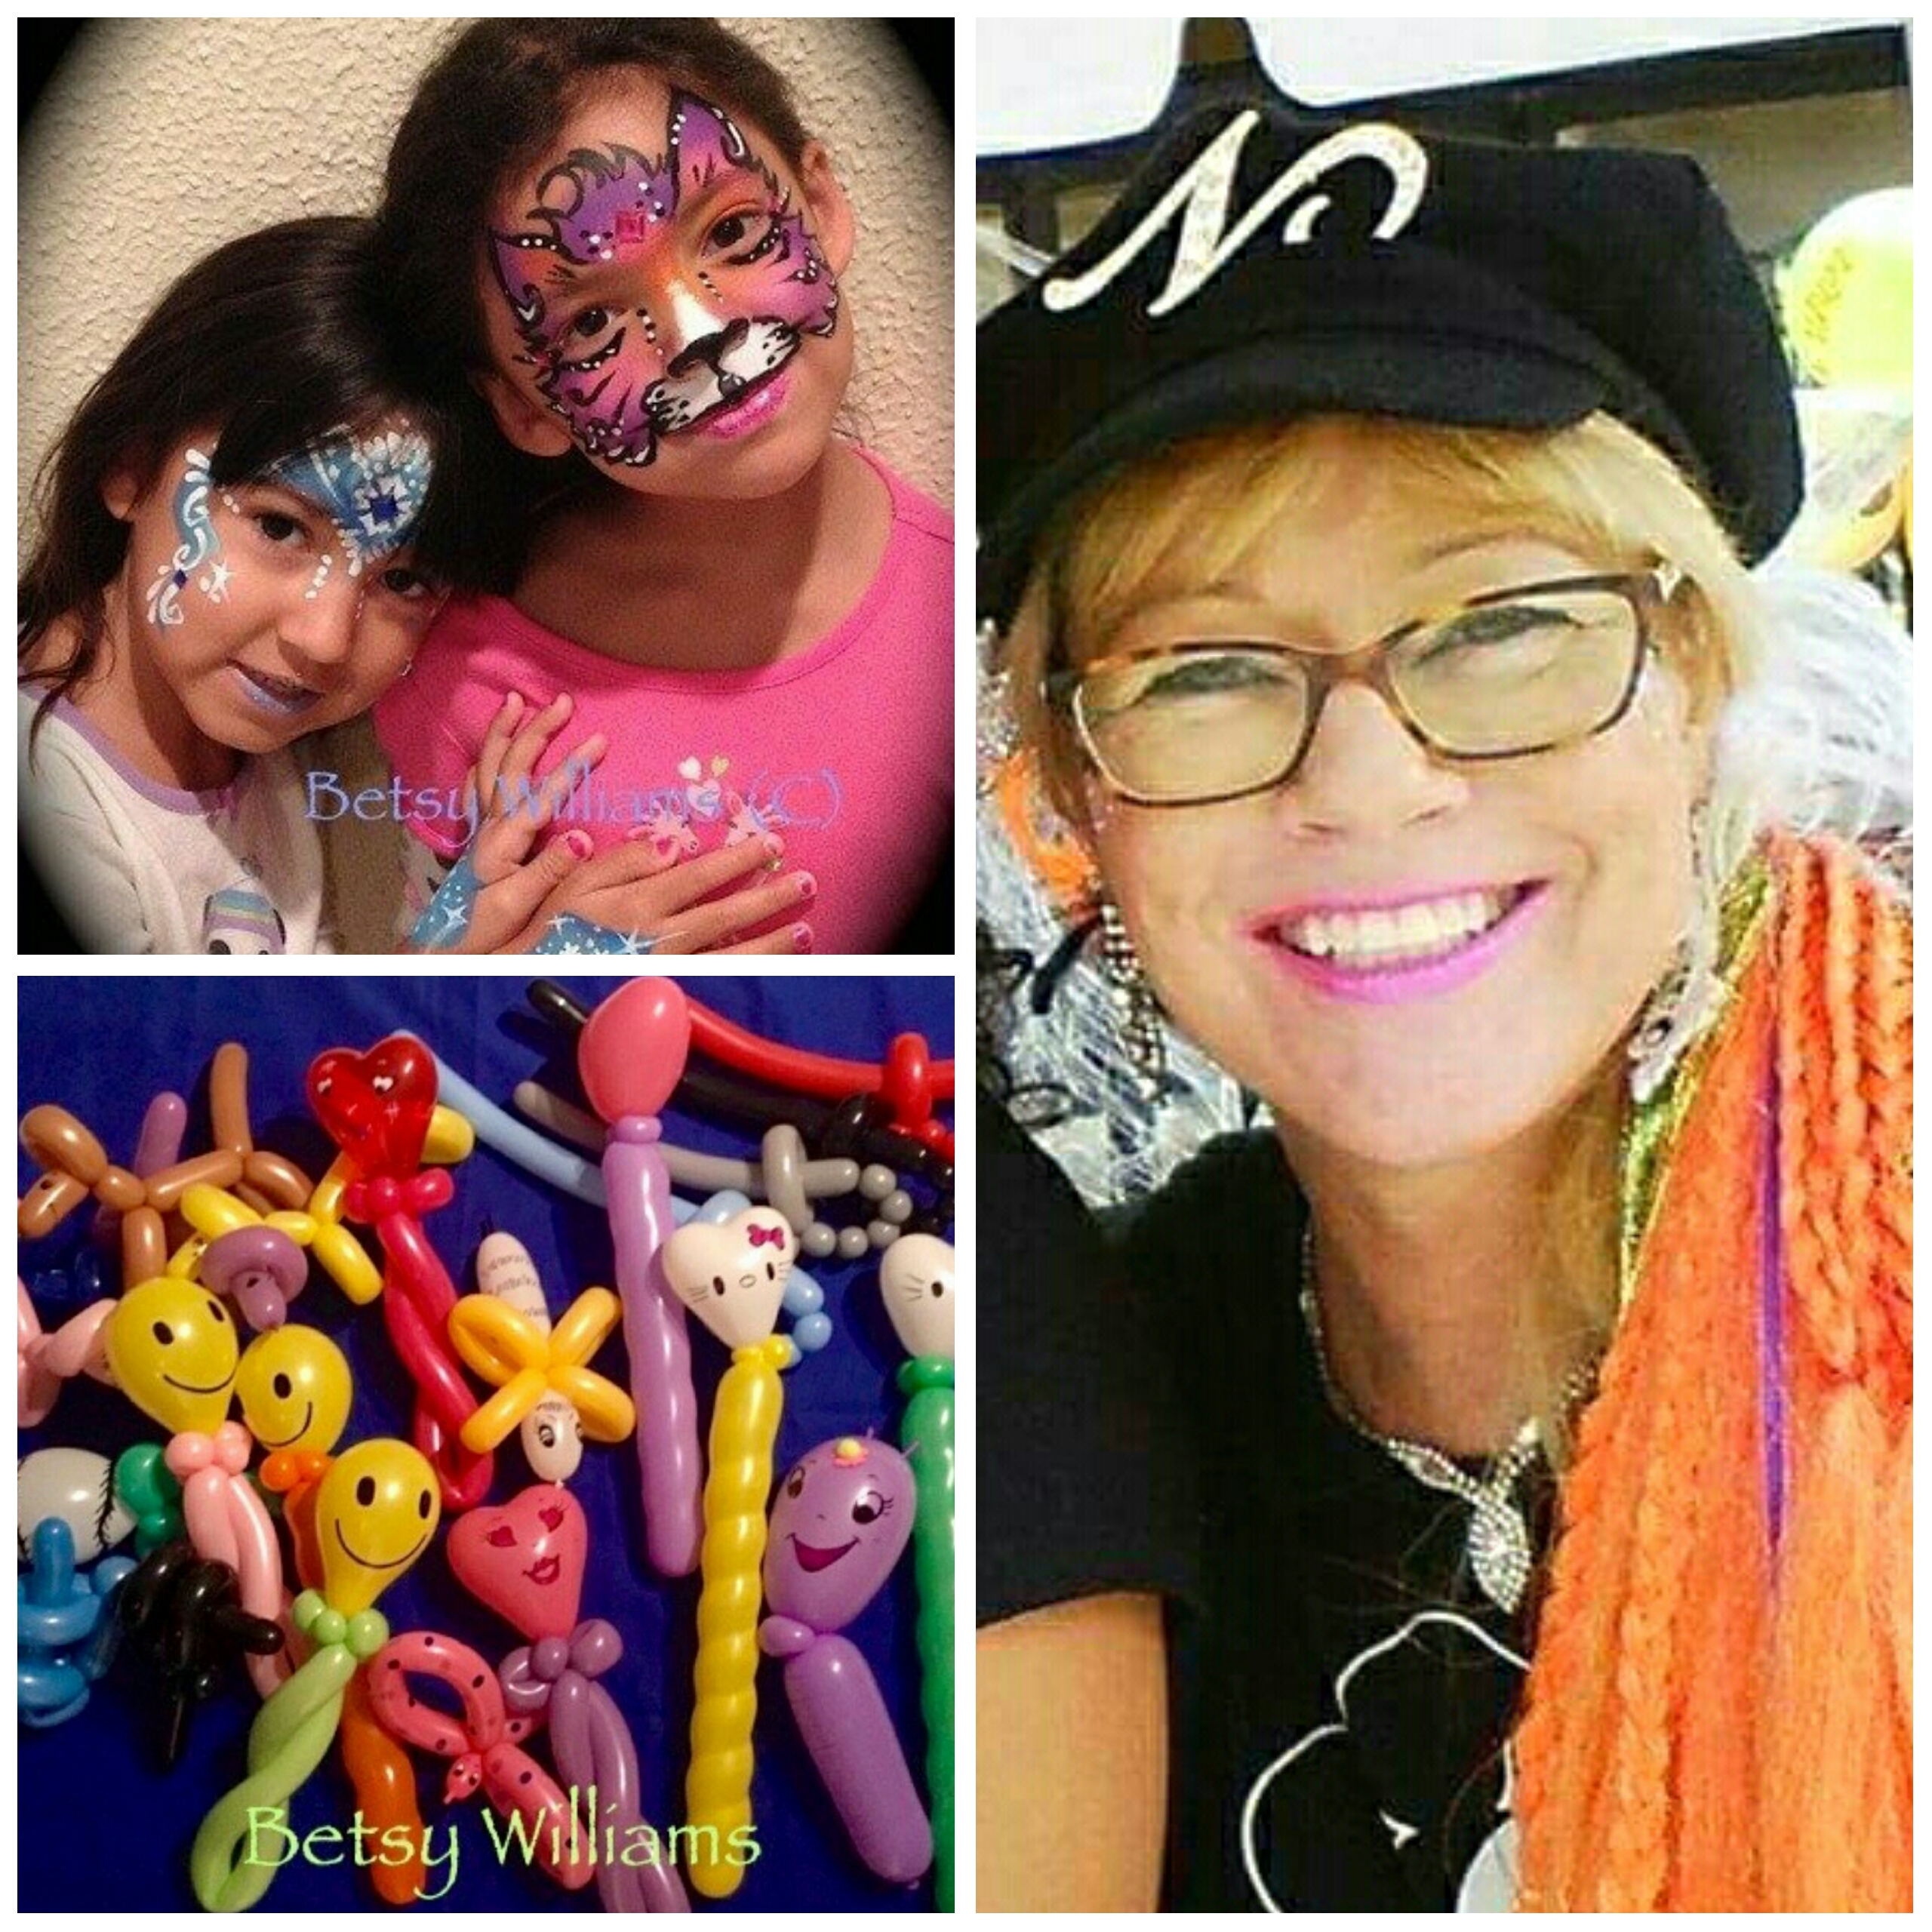 Betsy is an enthusiastic face painter, glitter tattoo artist, and balloon twister.